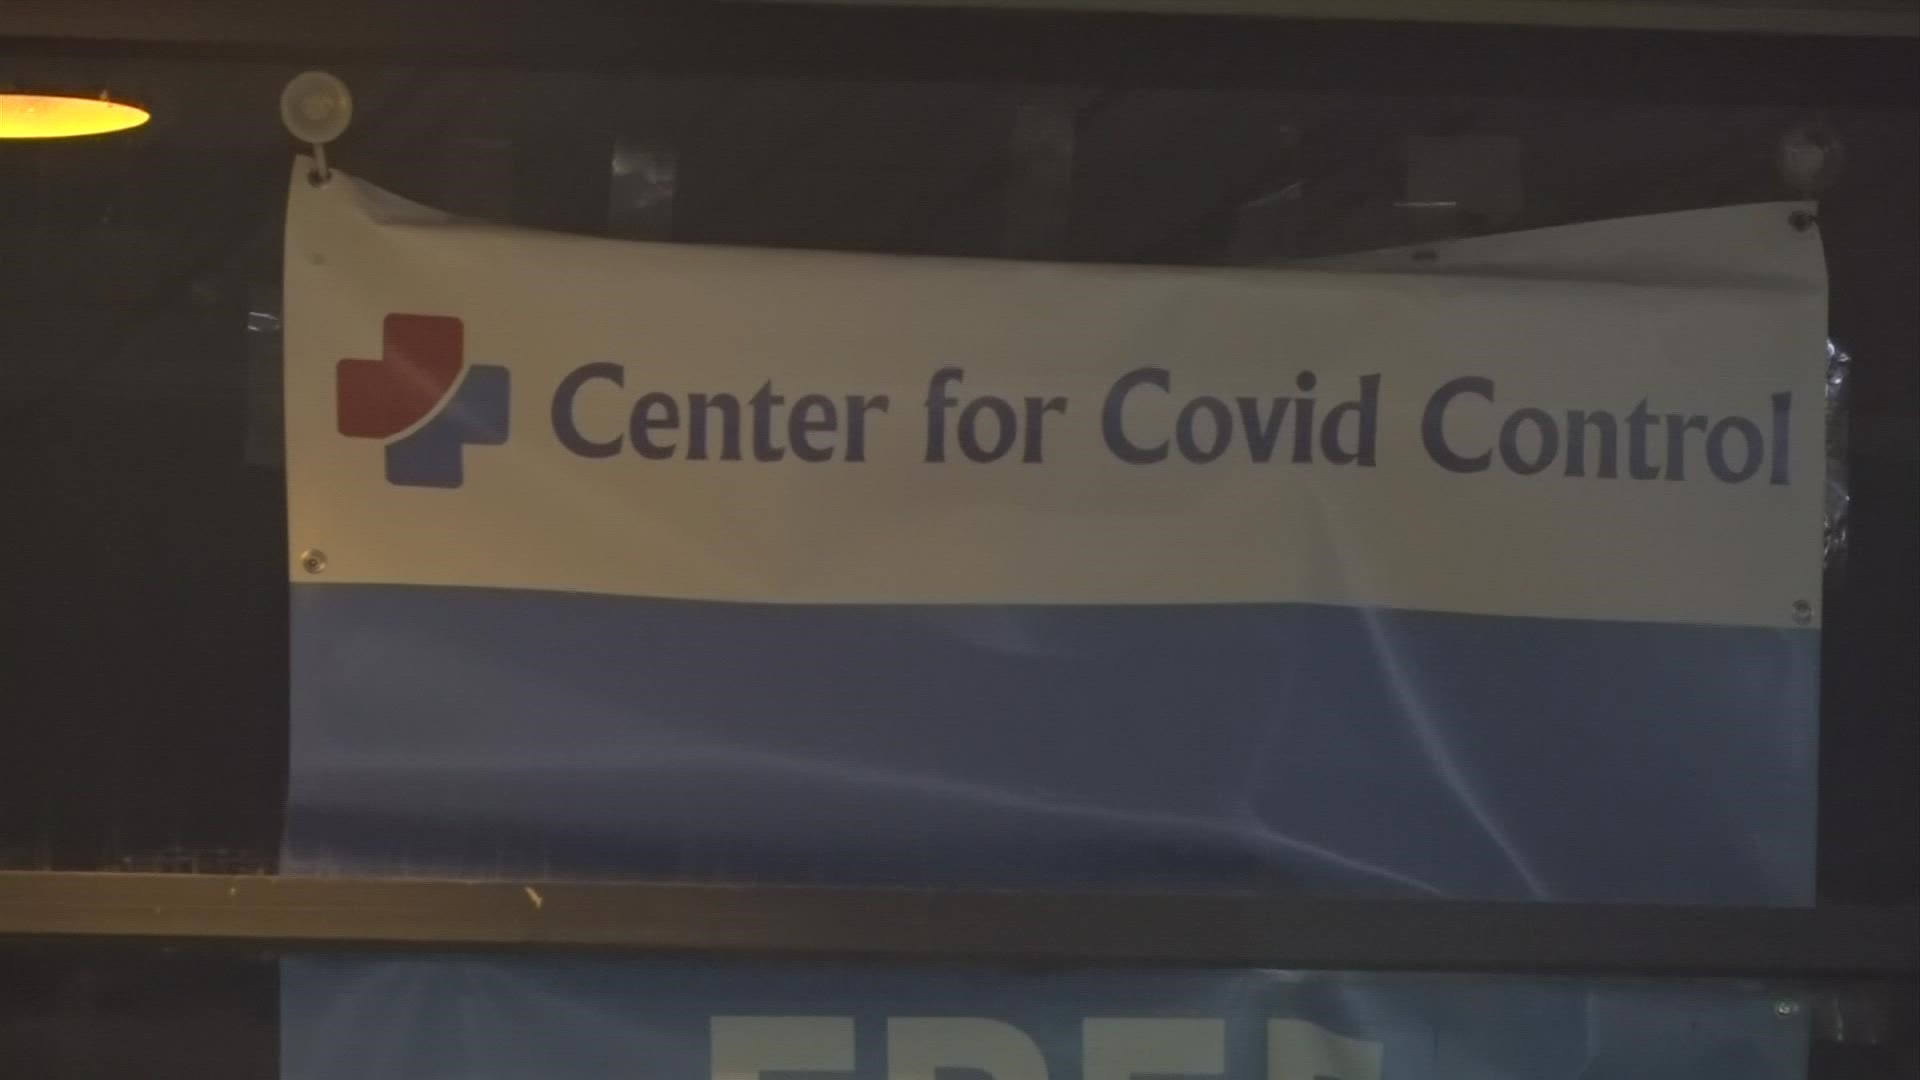 10Investigates reported some of those tested by the Center for Covid Control say they didn’t receive results for their COVID-19 tests.